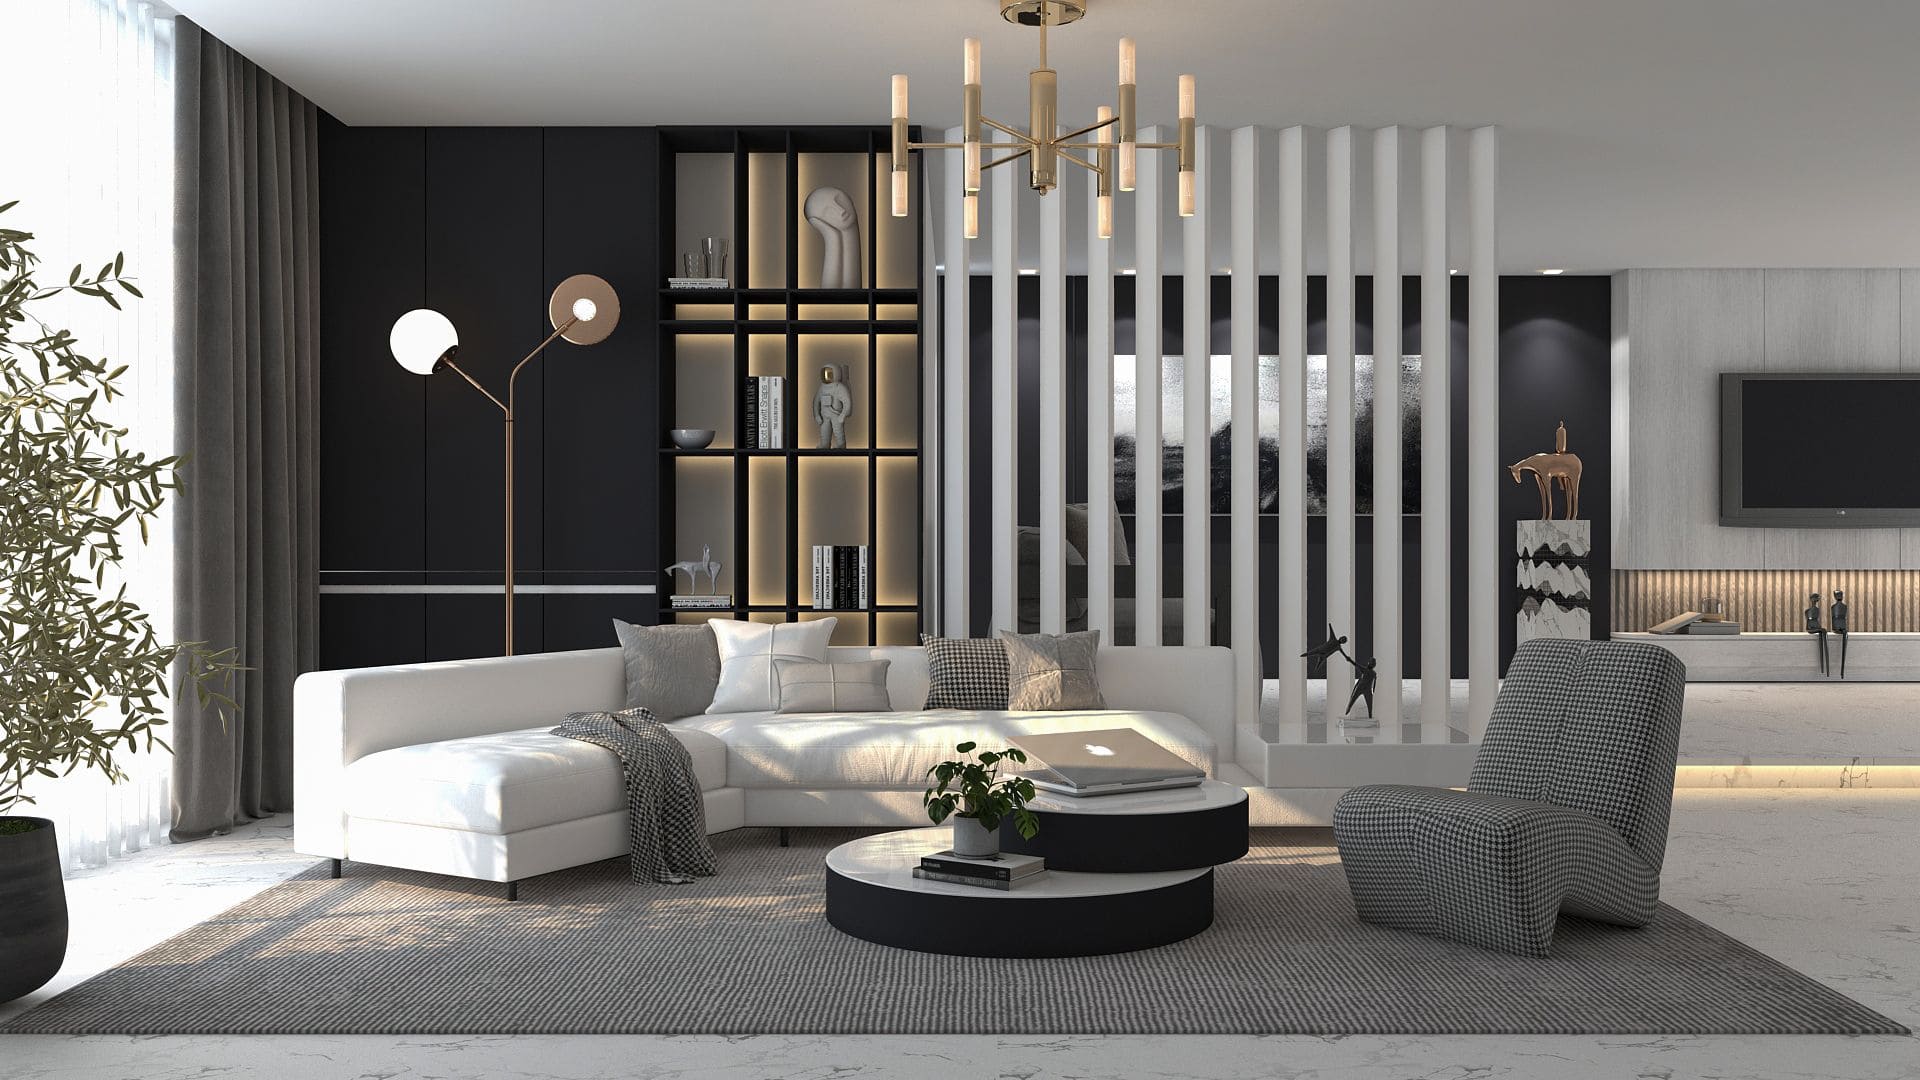 Mid-century-modern-inspired furniture in a black & white living room by Homilo